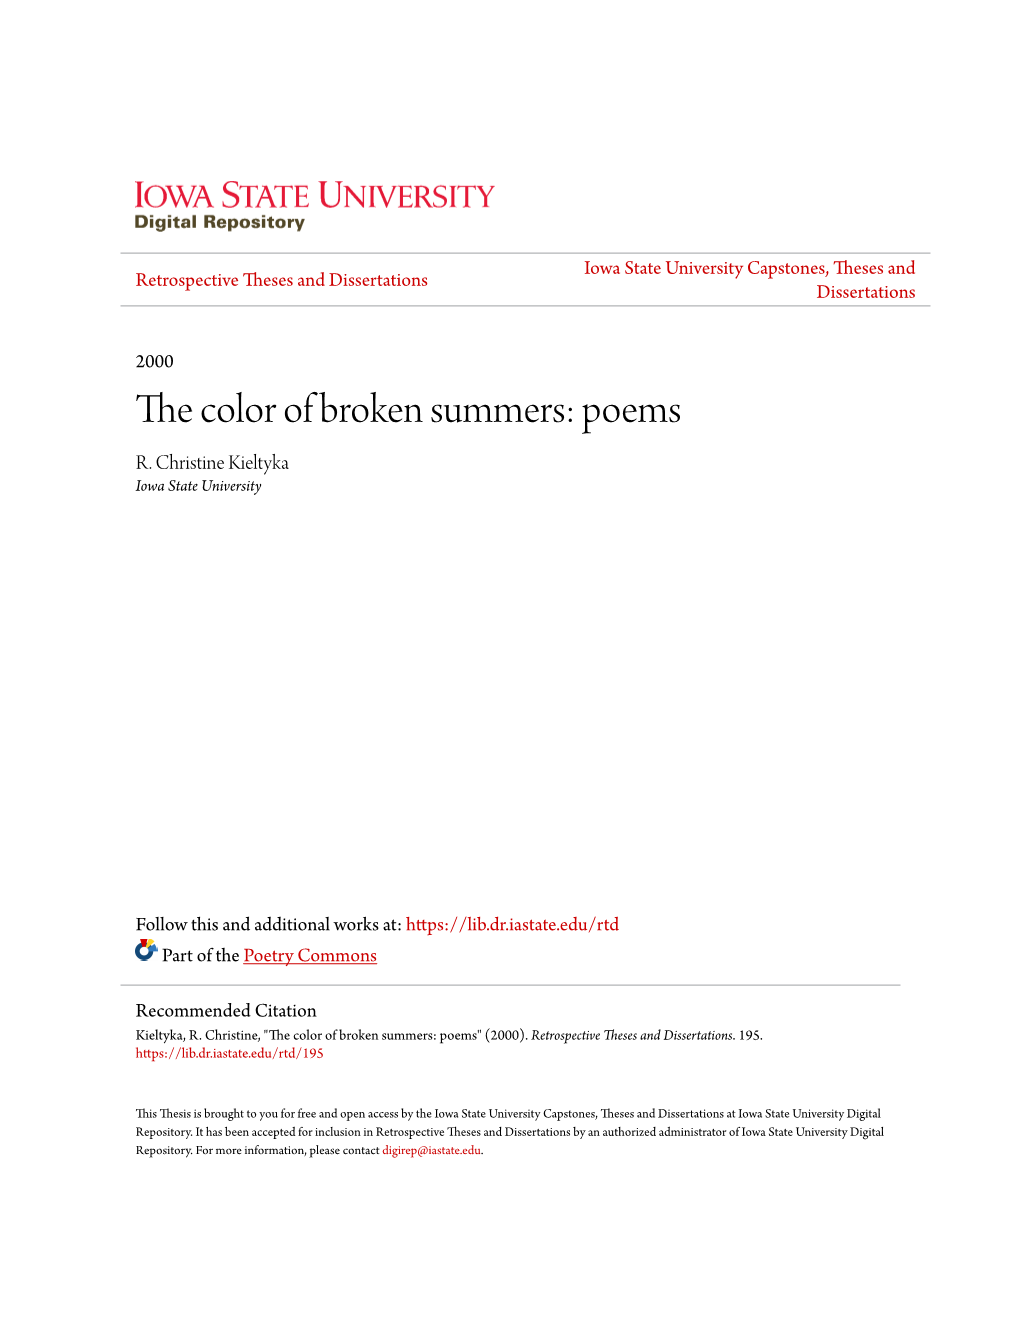 The Color of Broken Summers: Poems R